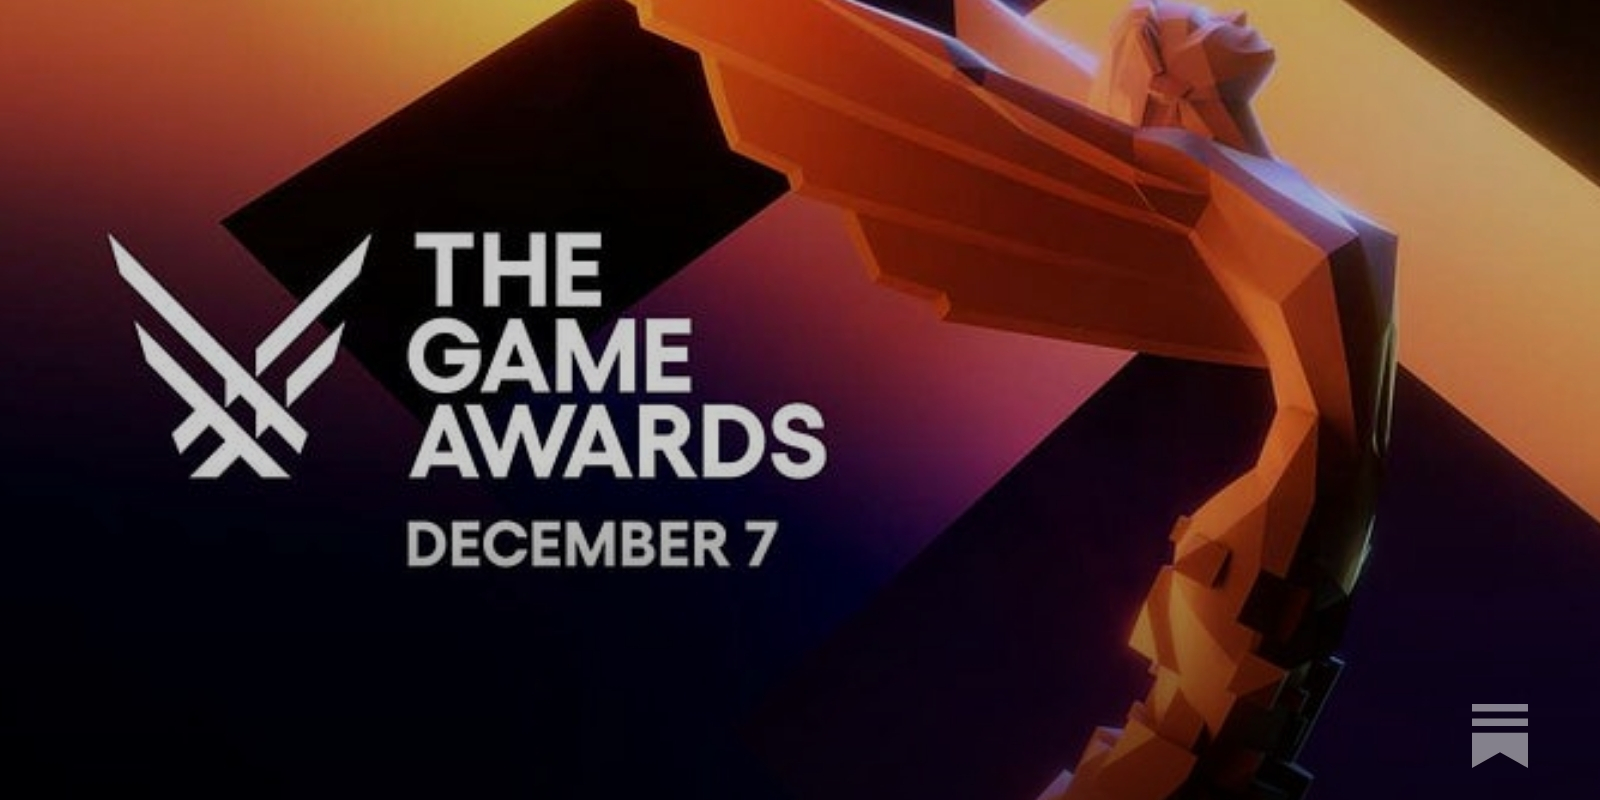 The Game Awards: Everything You Need to Know When Preparing to Argue Online